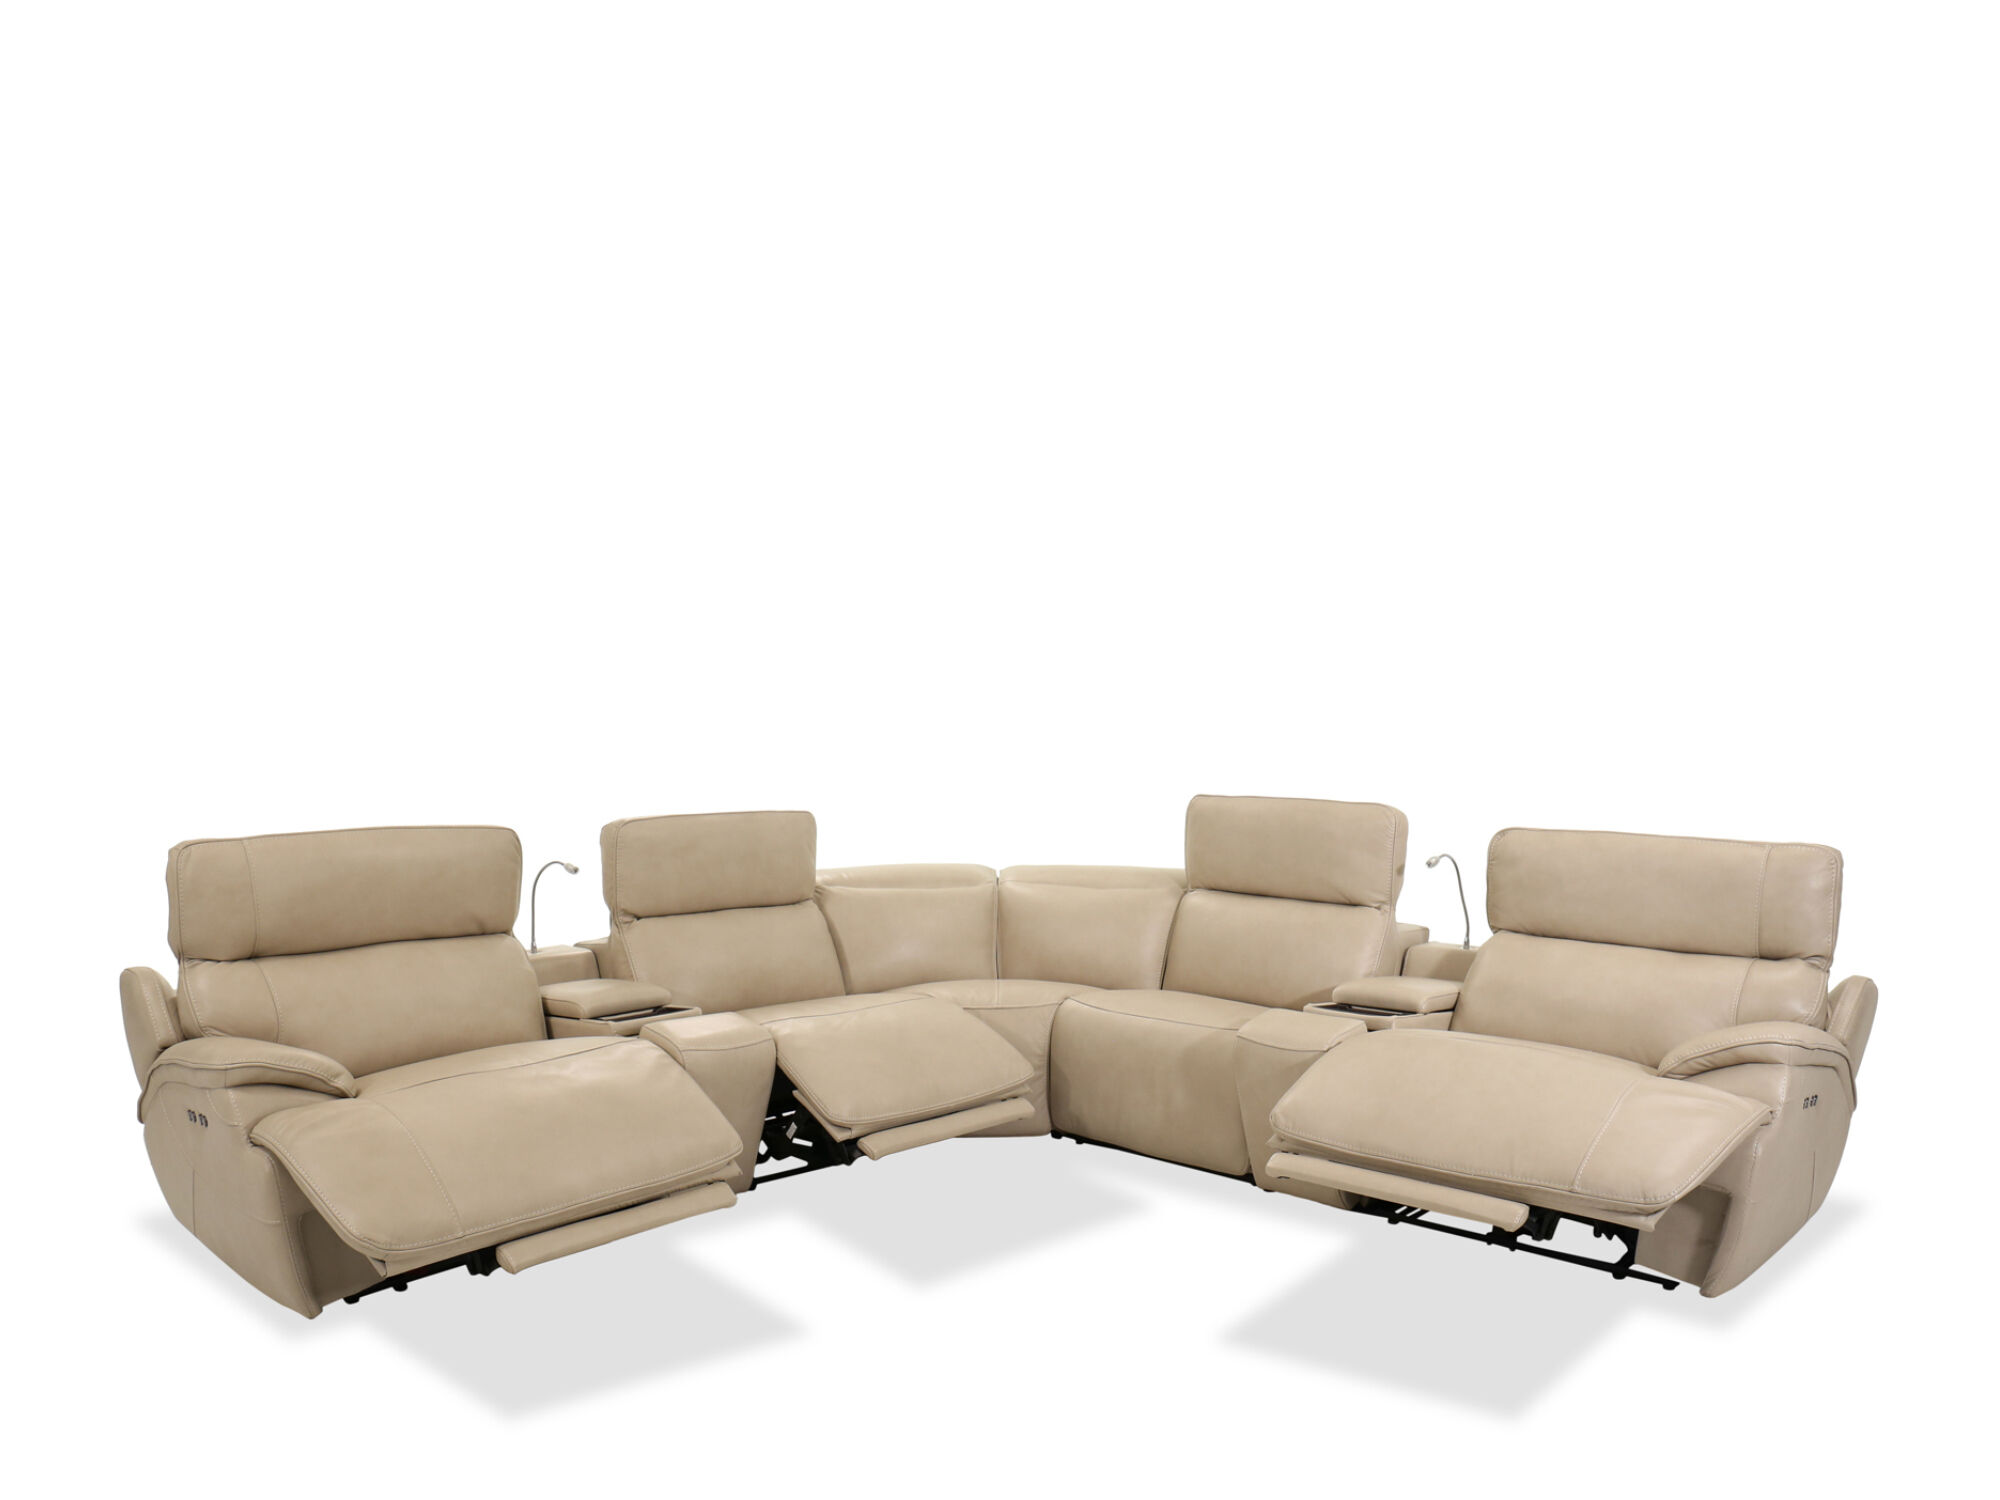 Seven Piece Leather Recliner Sectional, Leather Reclining Sectionals